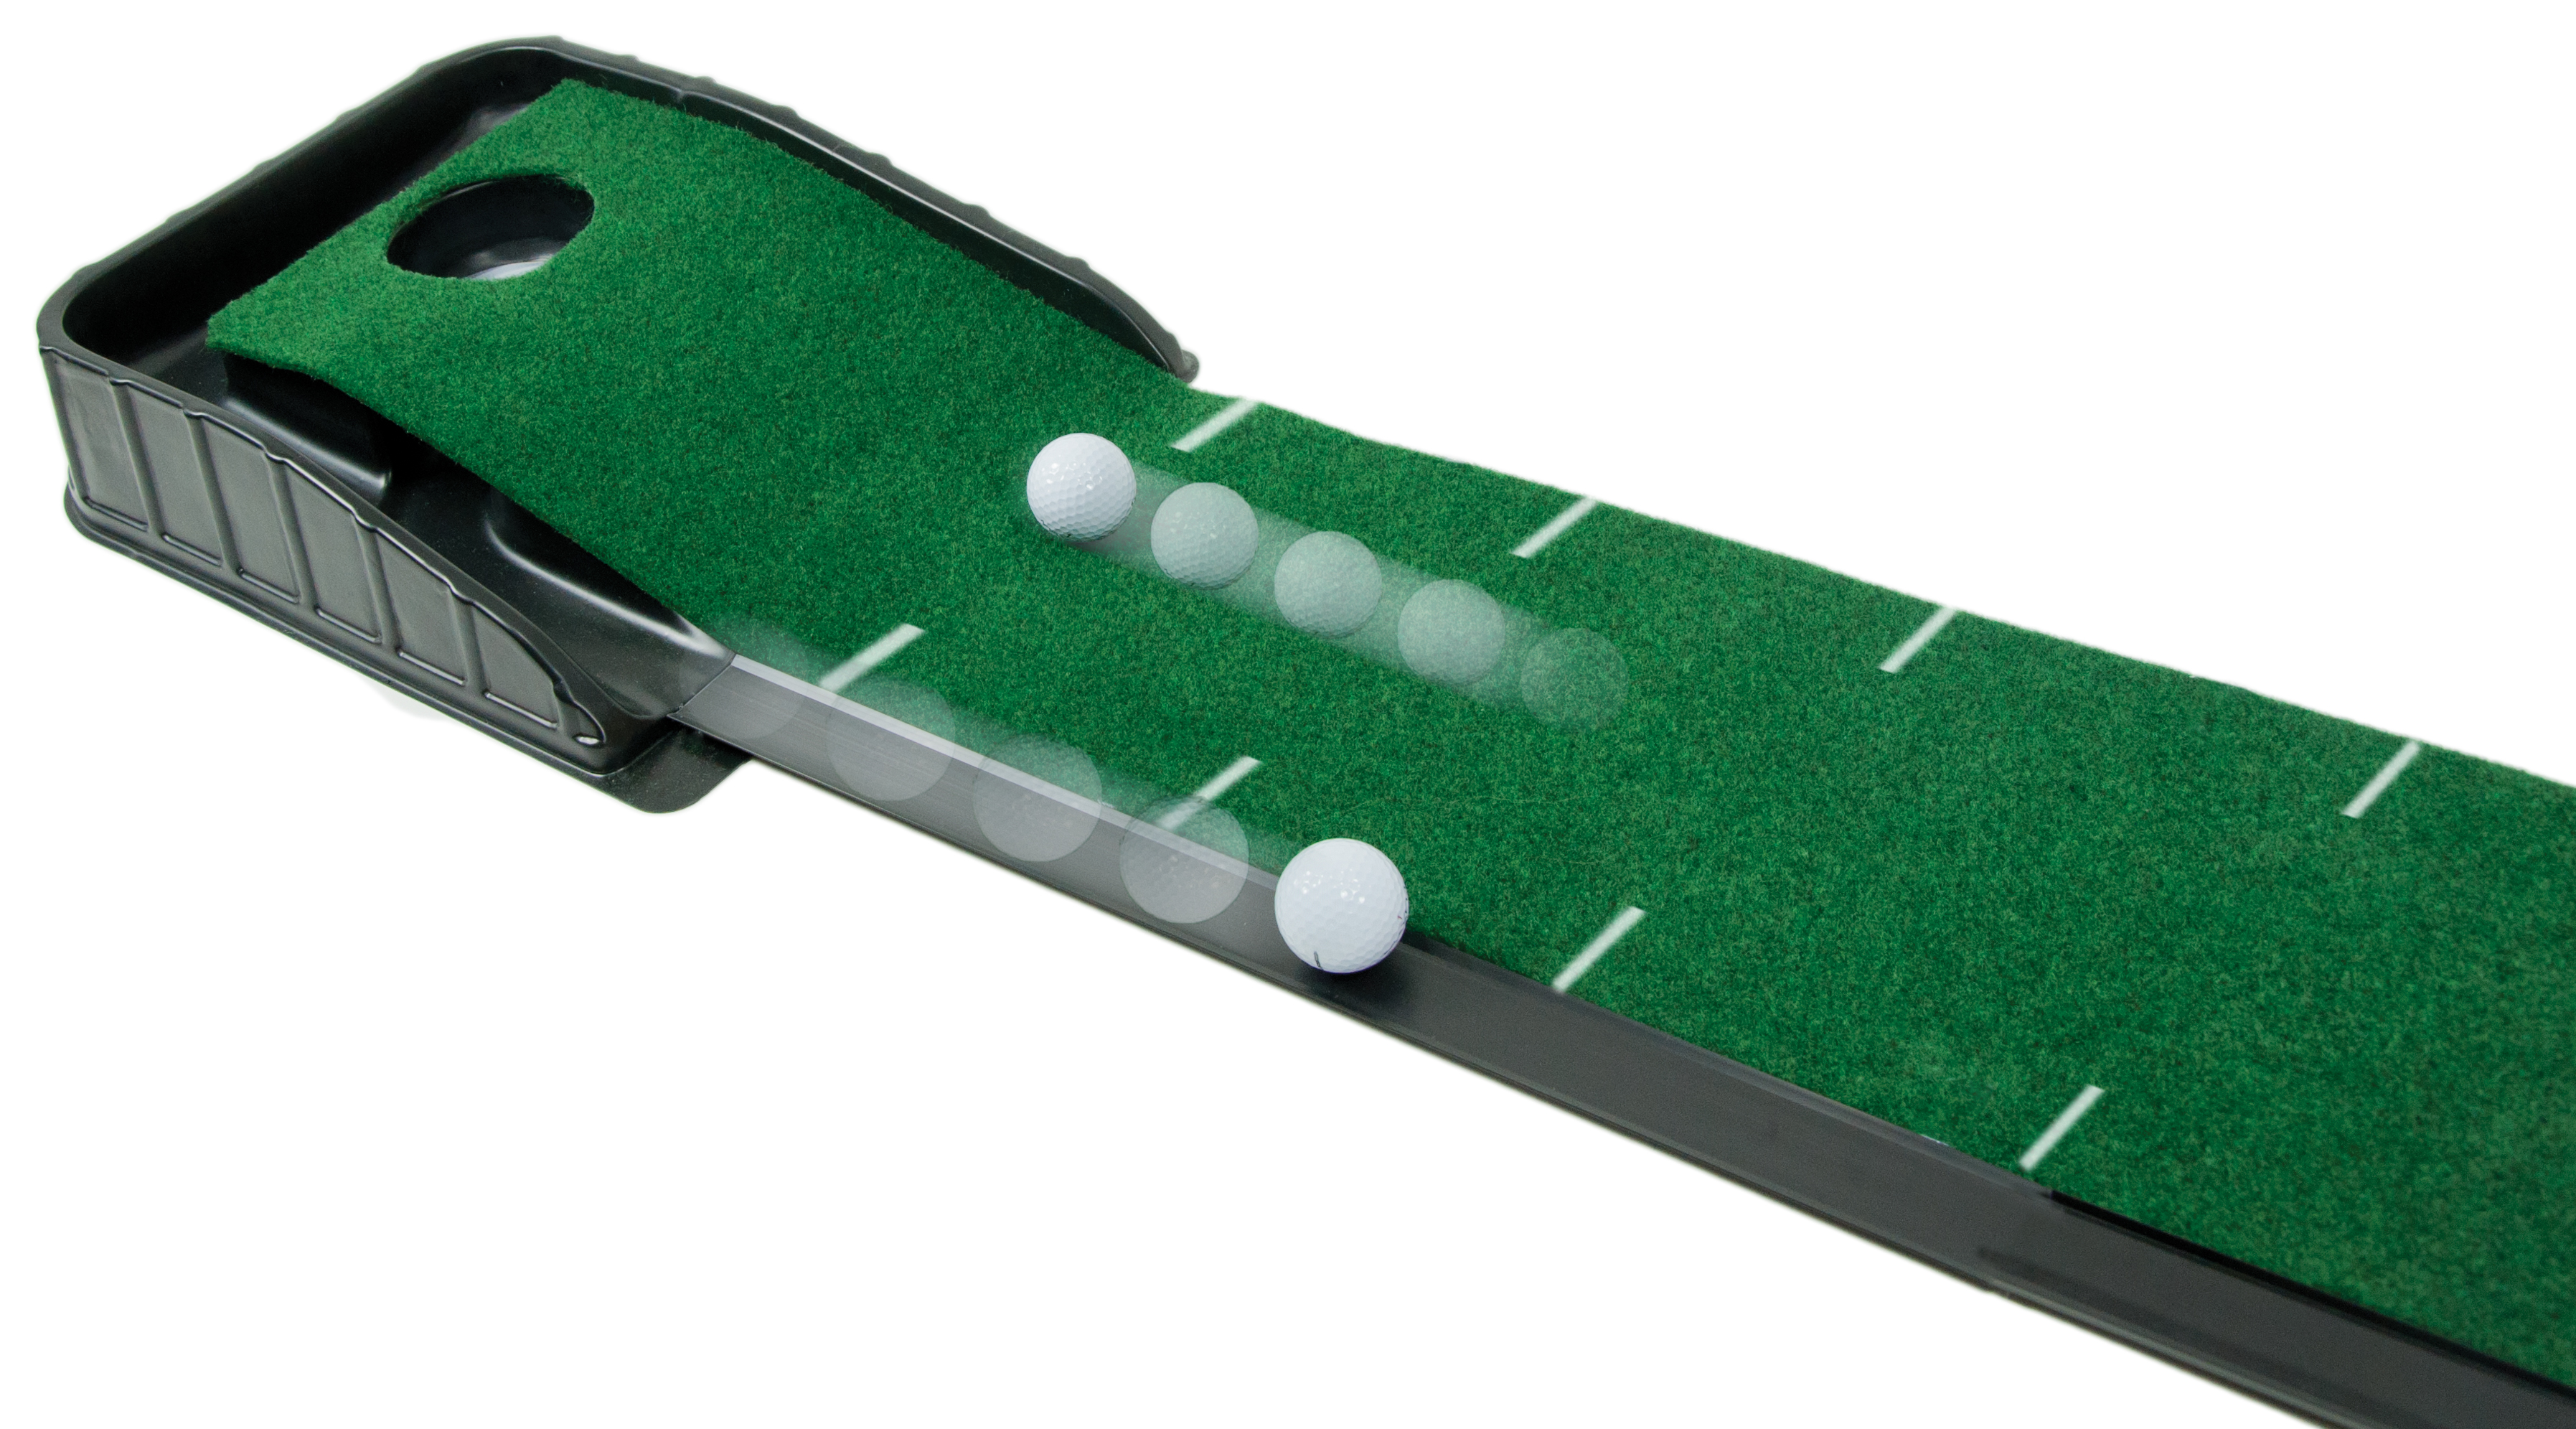 Golf, Gifts, & Gallery Auto Ball Return Putting System - image 1 of 5